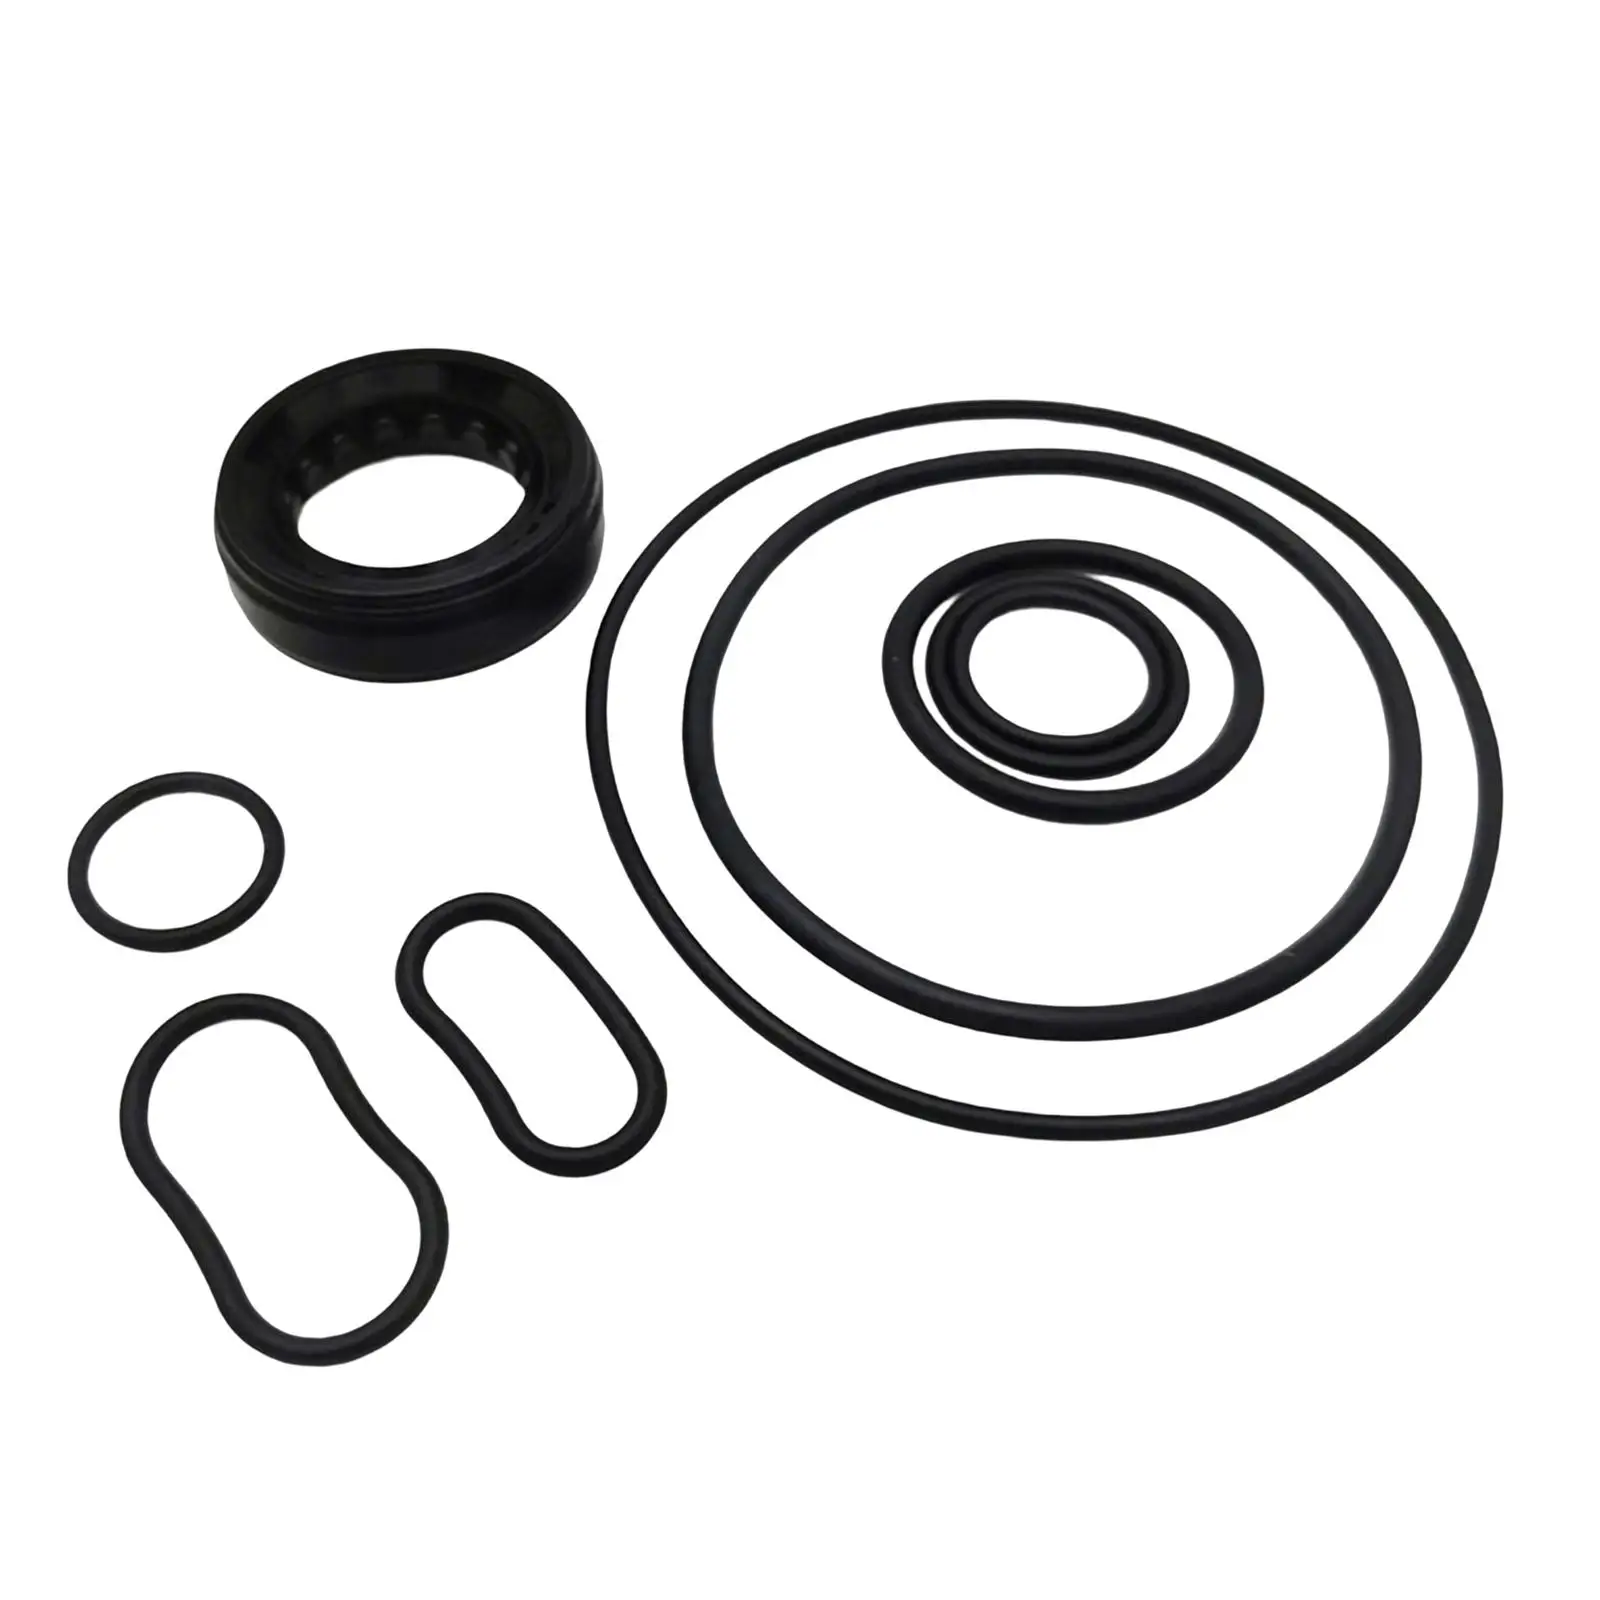 Power Steering Pump Seal Kit 06539-Pnc-003 Replacement Vehicle Professional Auto